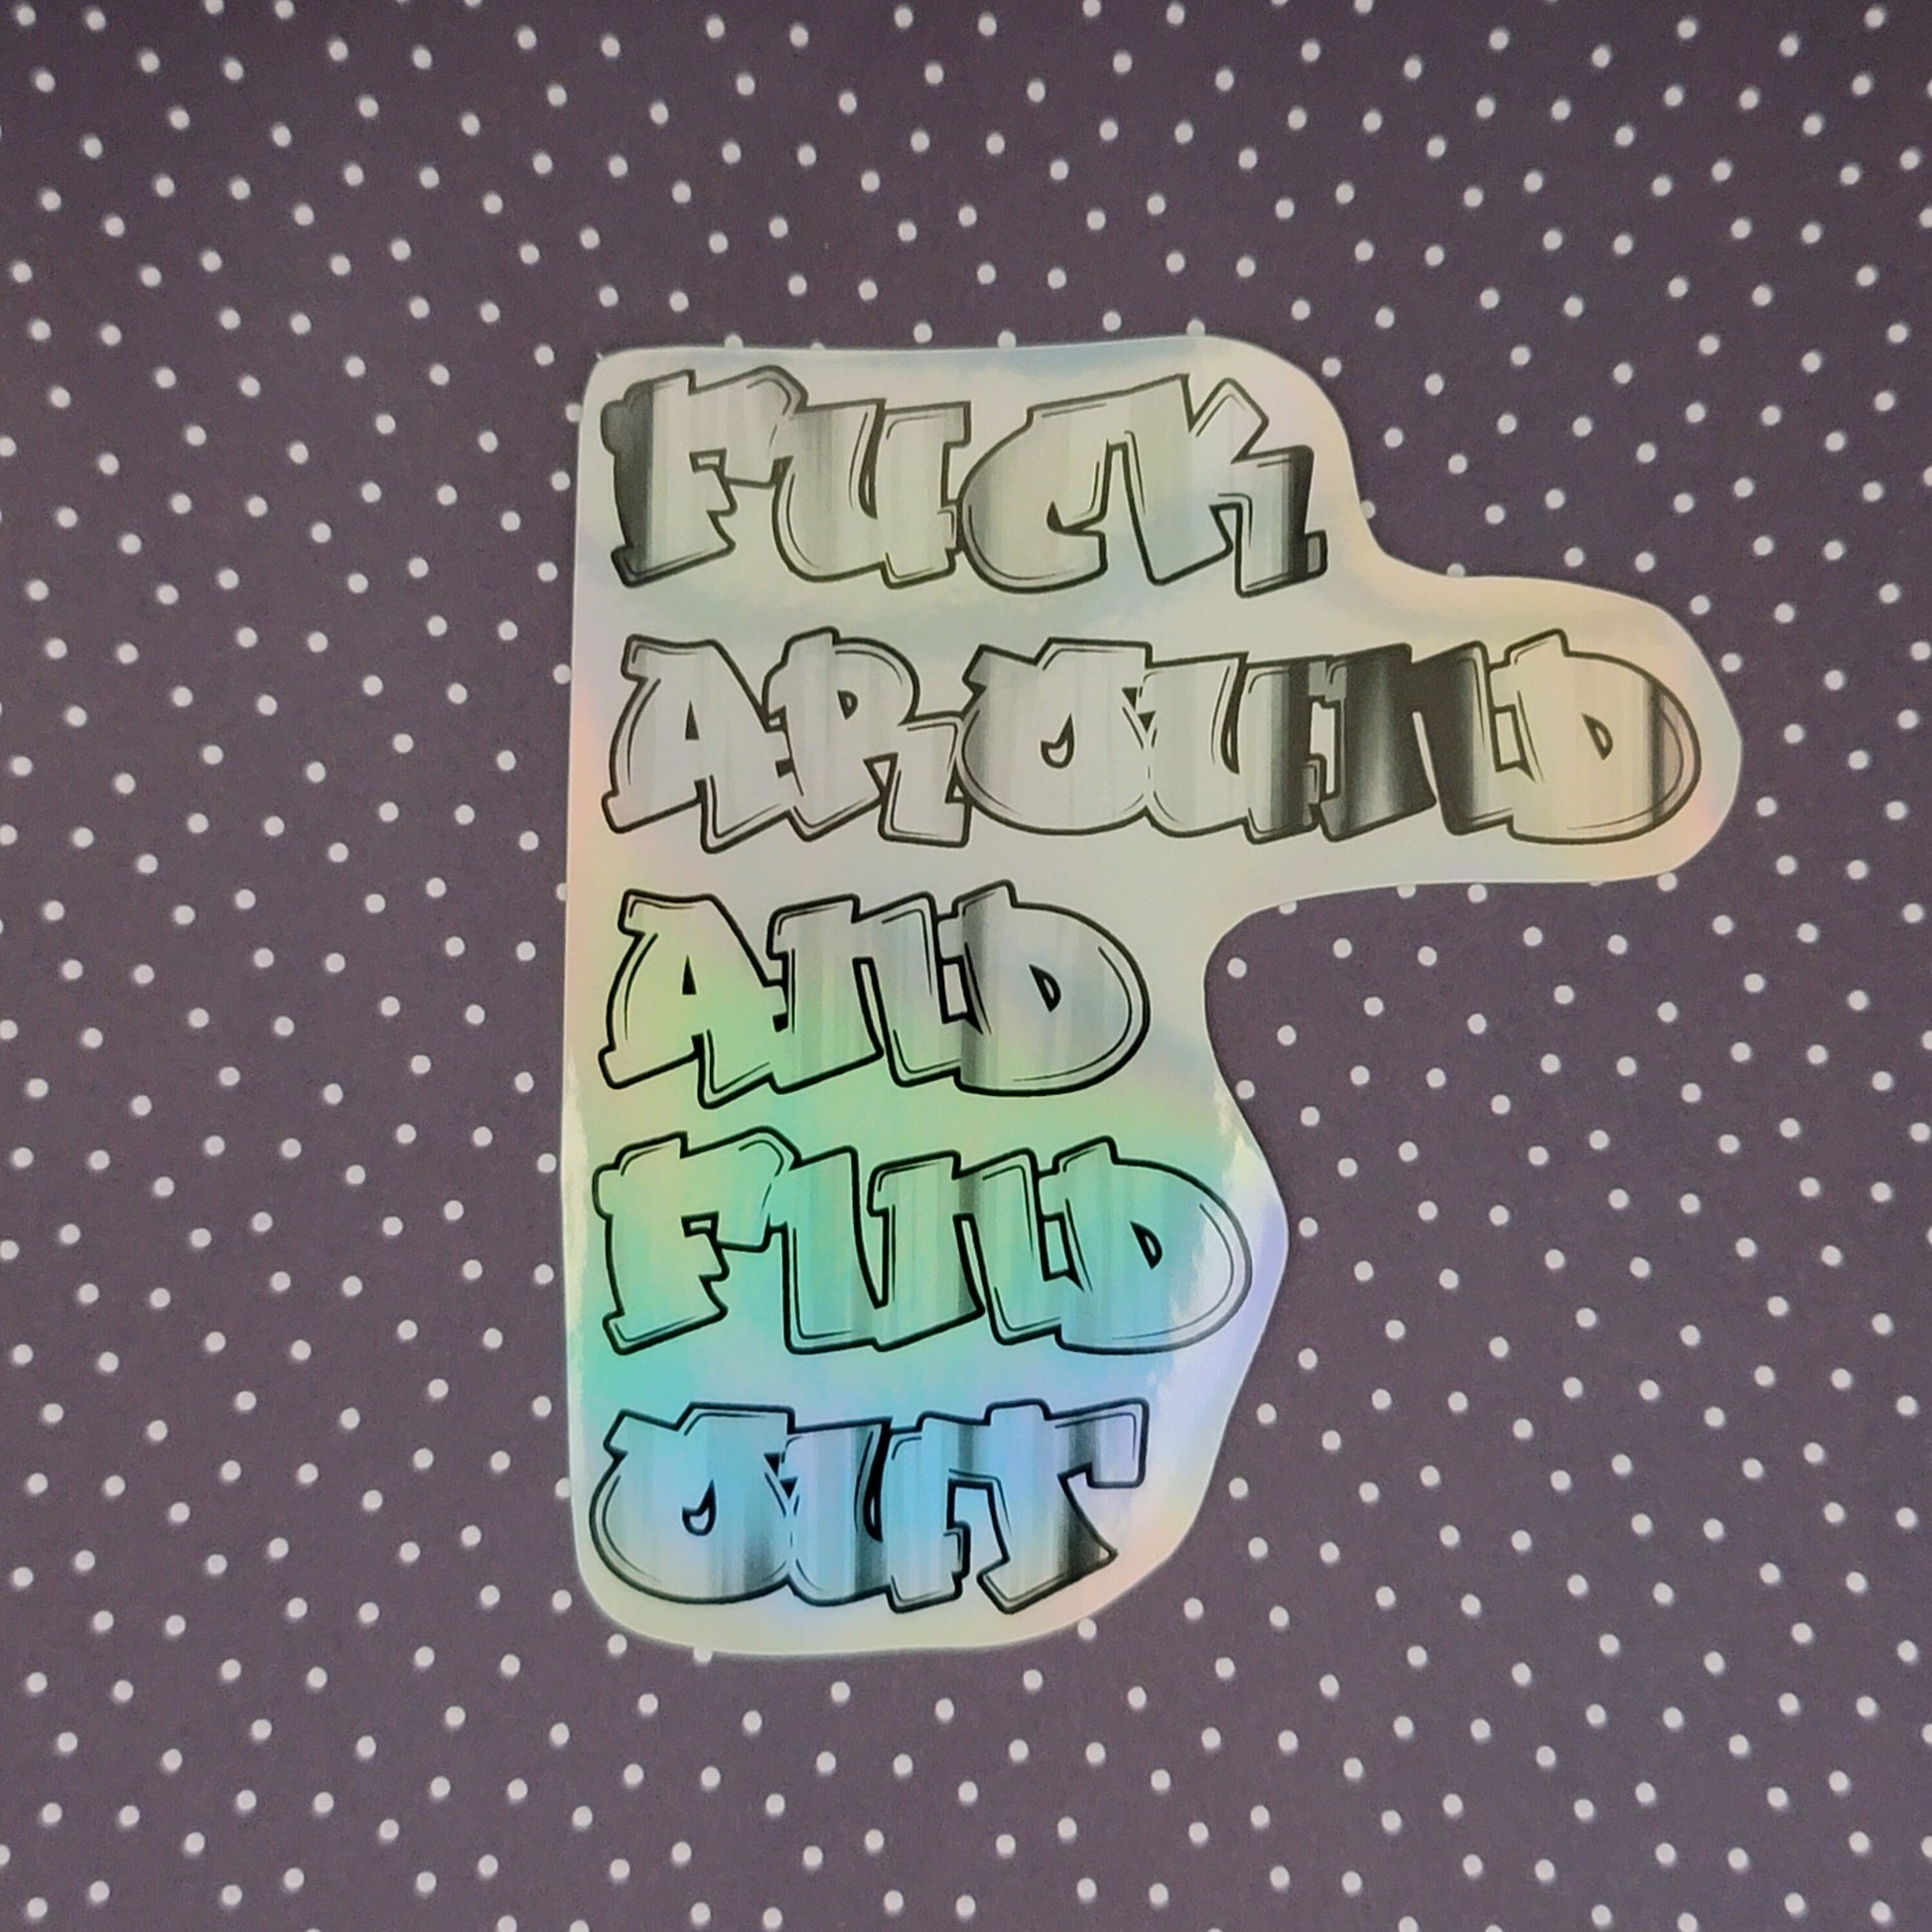 F*** around and find out sticker